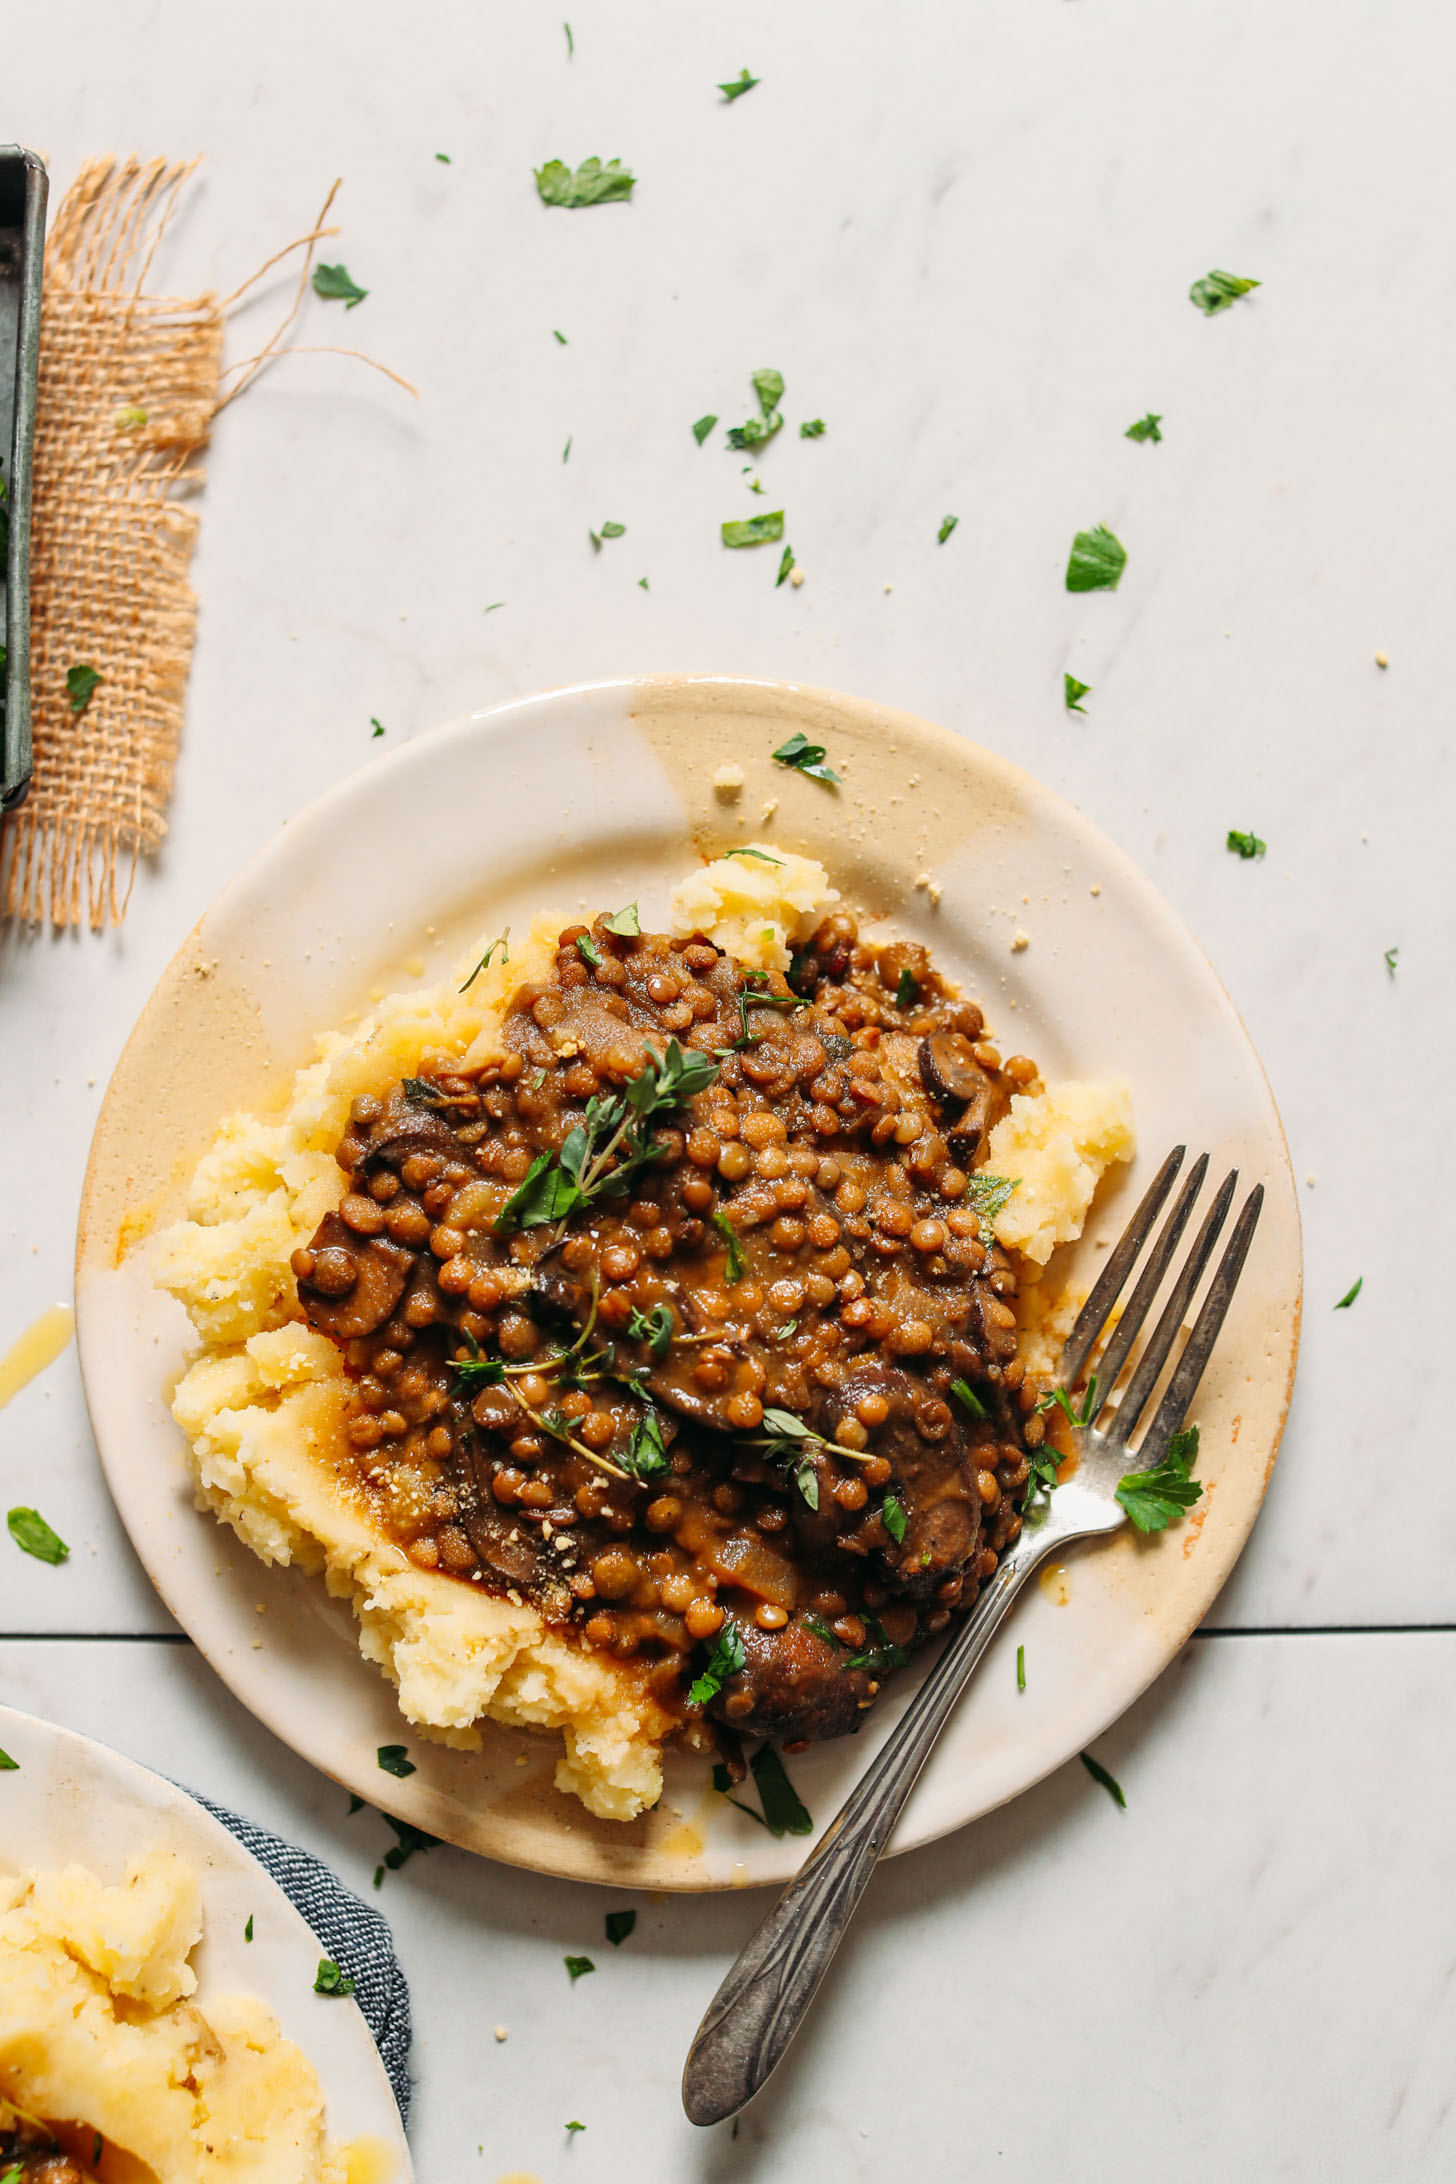 A hearty serving of fiber- and protein-packed Lentil Mushroom Stew Over Mashed Potatoes